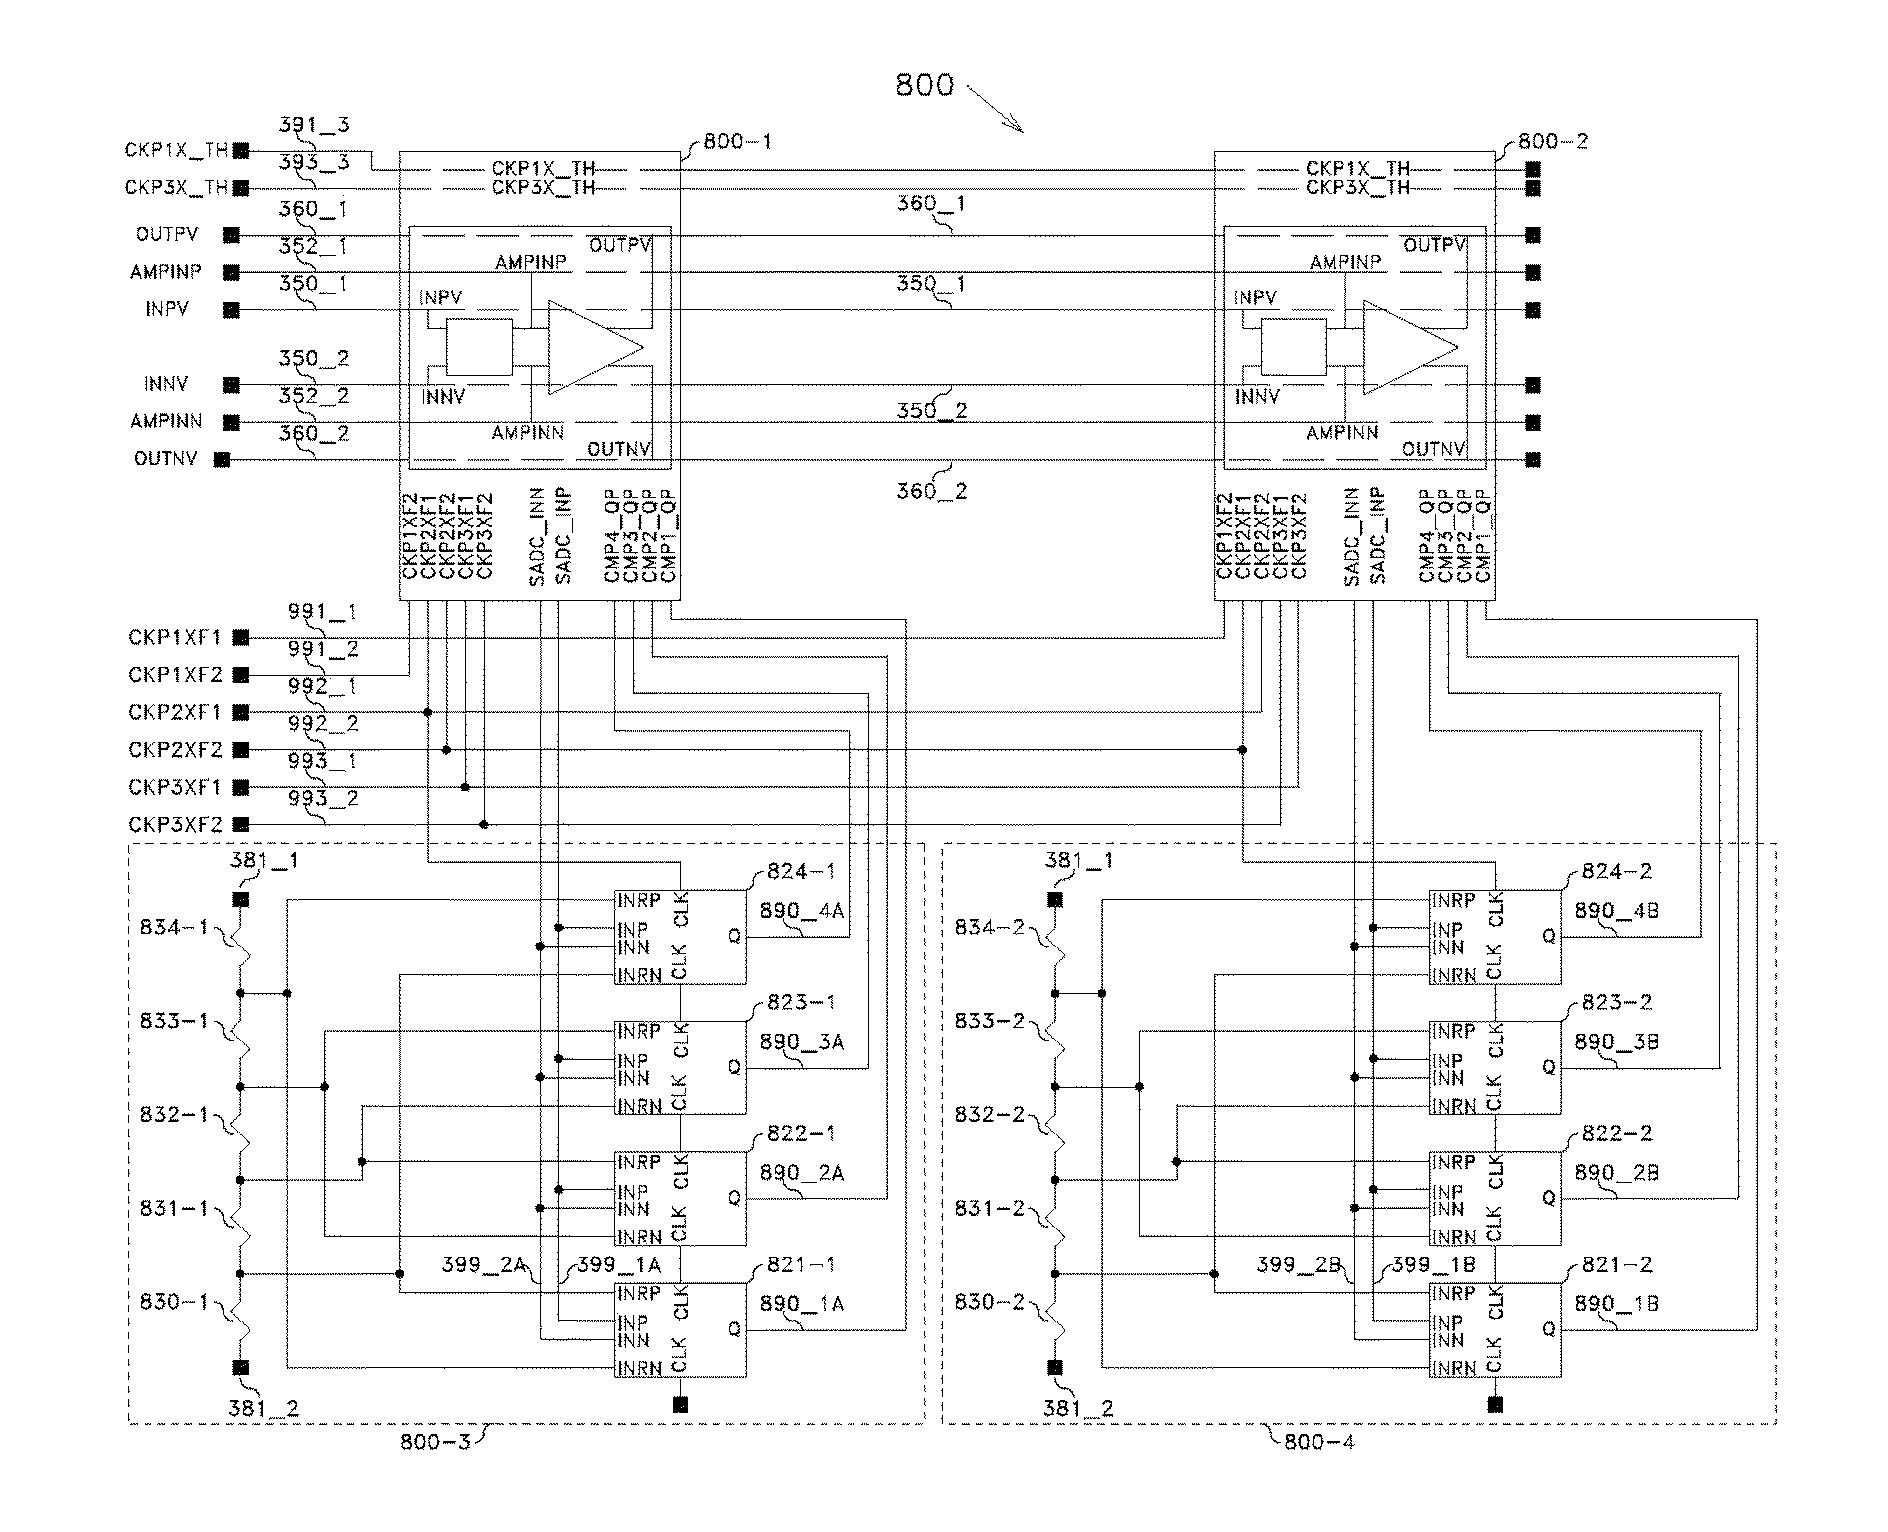 ADC first stage combining both sample-hold and ADC first stage analog-to-digital conversion functions